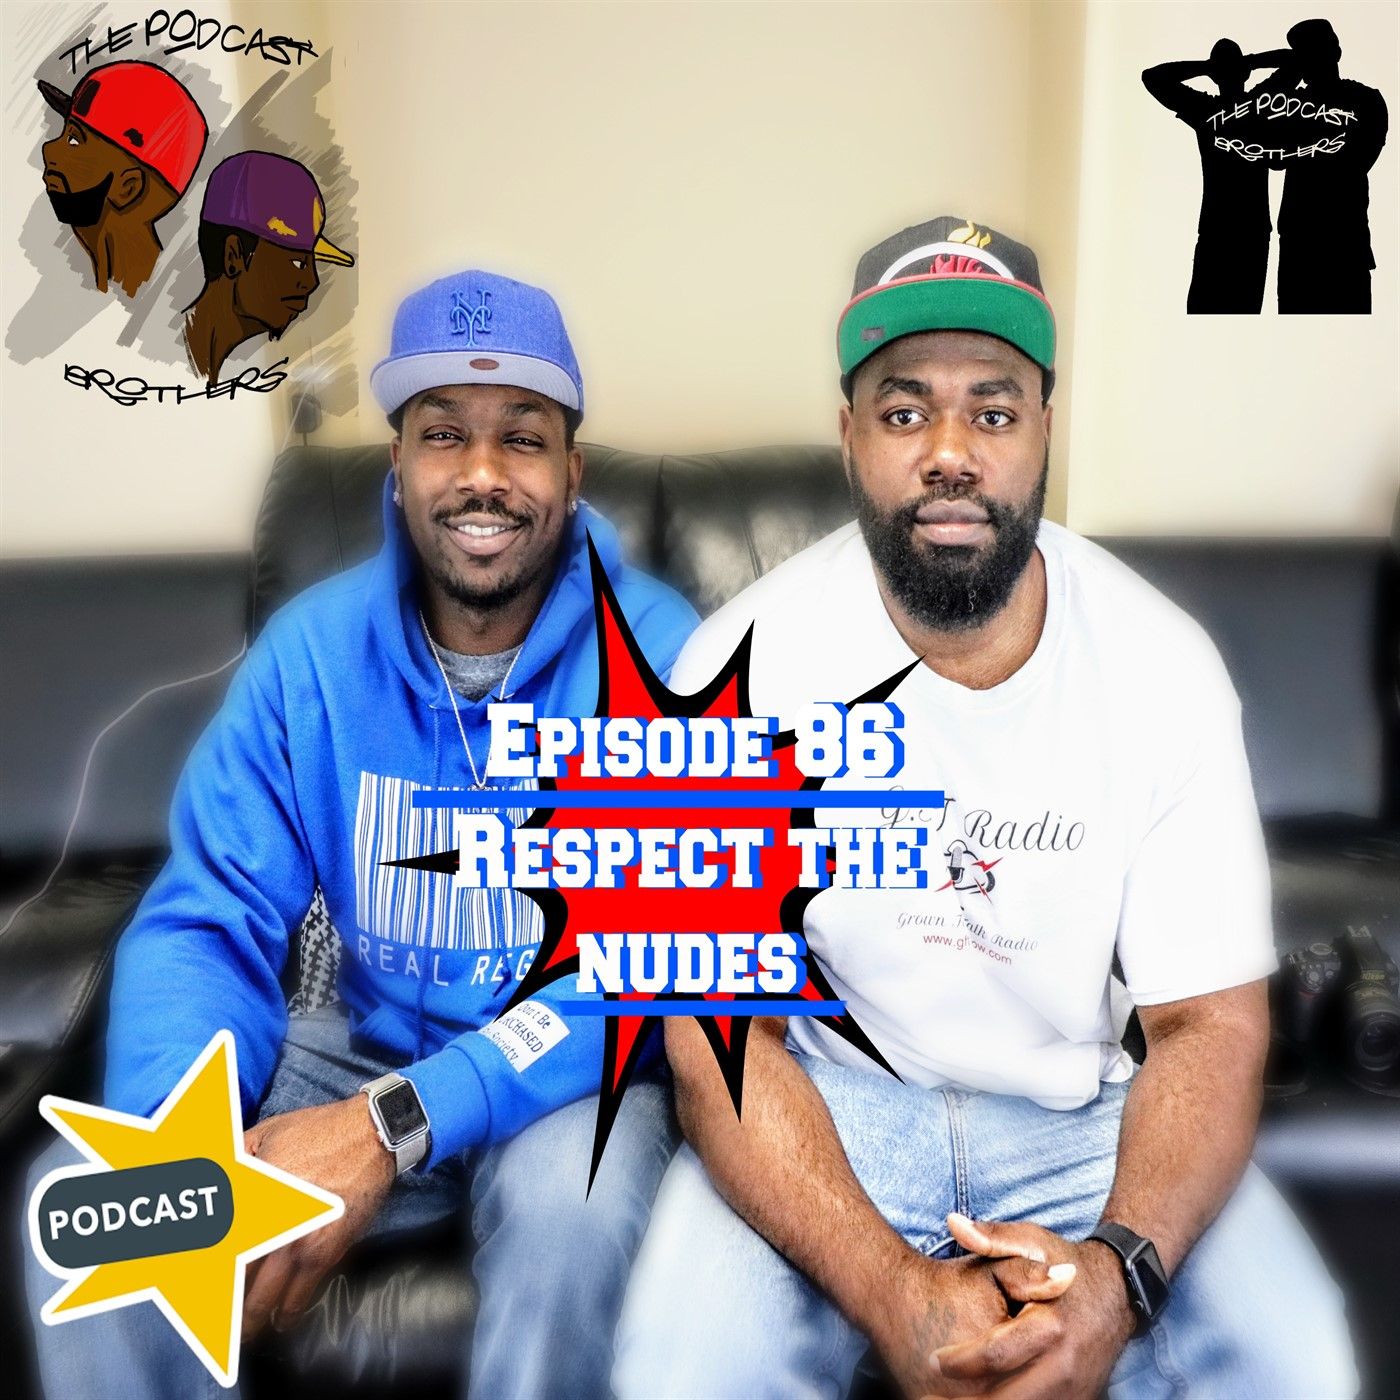 Episode 86 - Respect the nudes